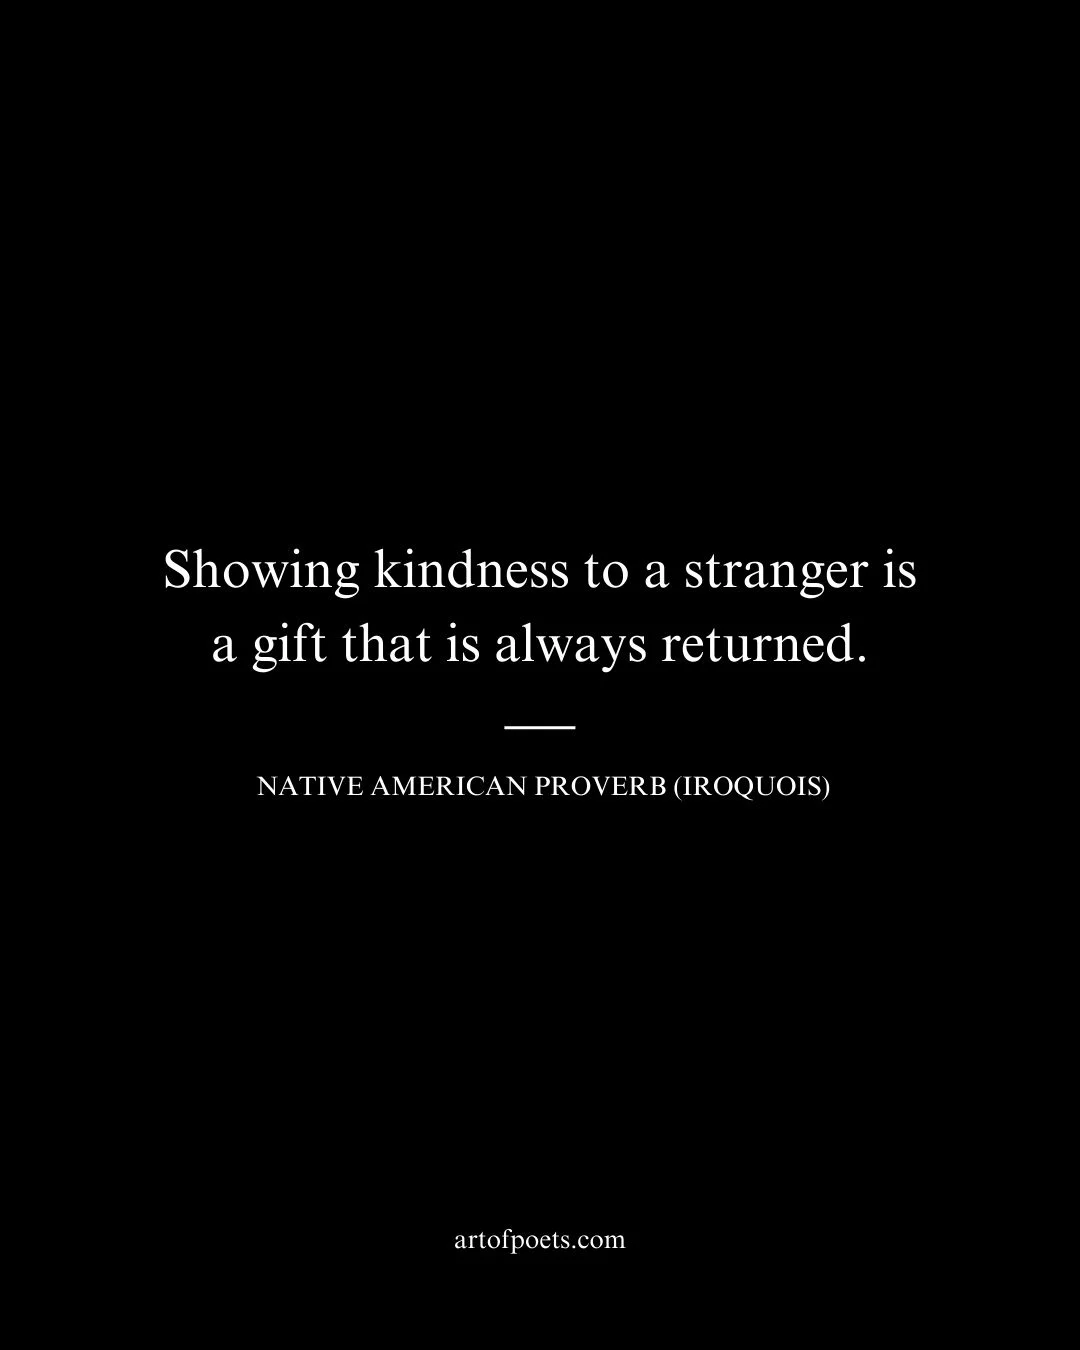 Showing kindness to a stranger is a gift that is always returned